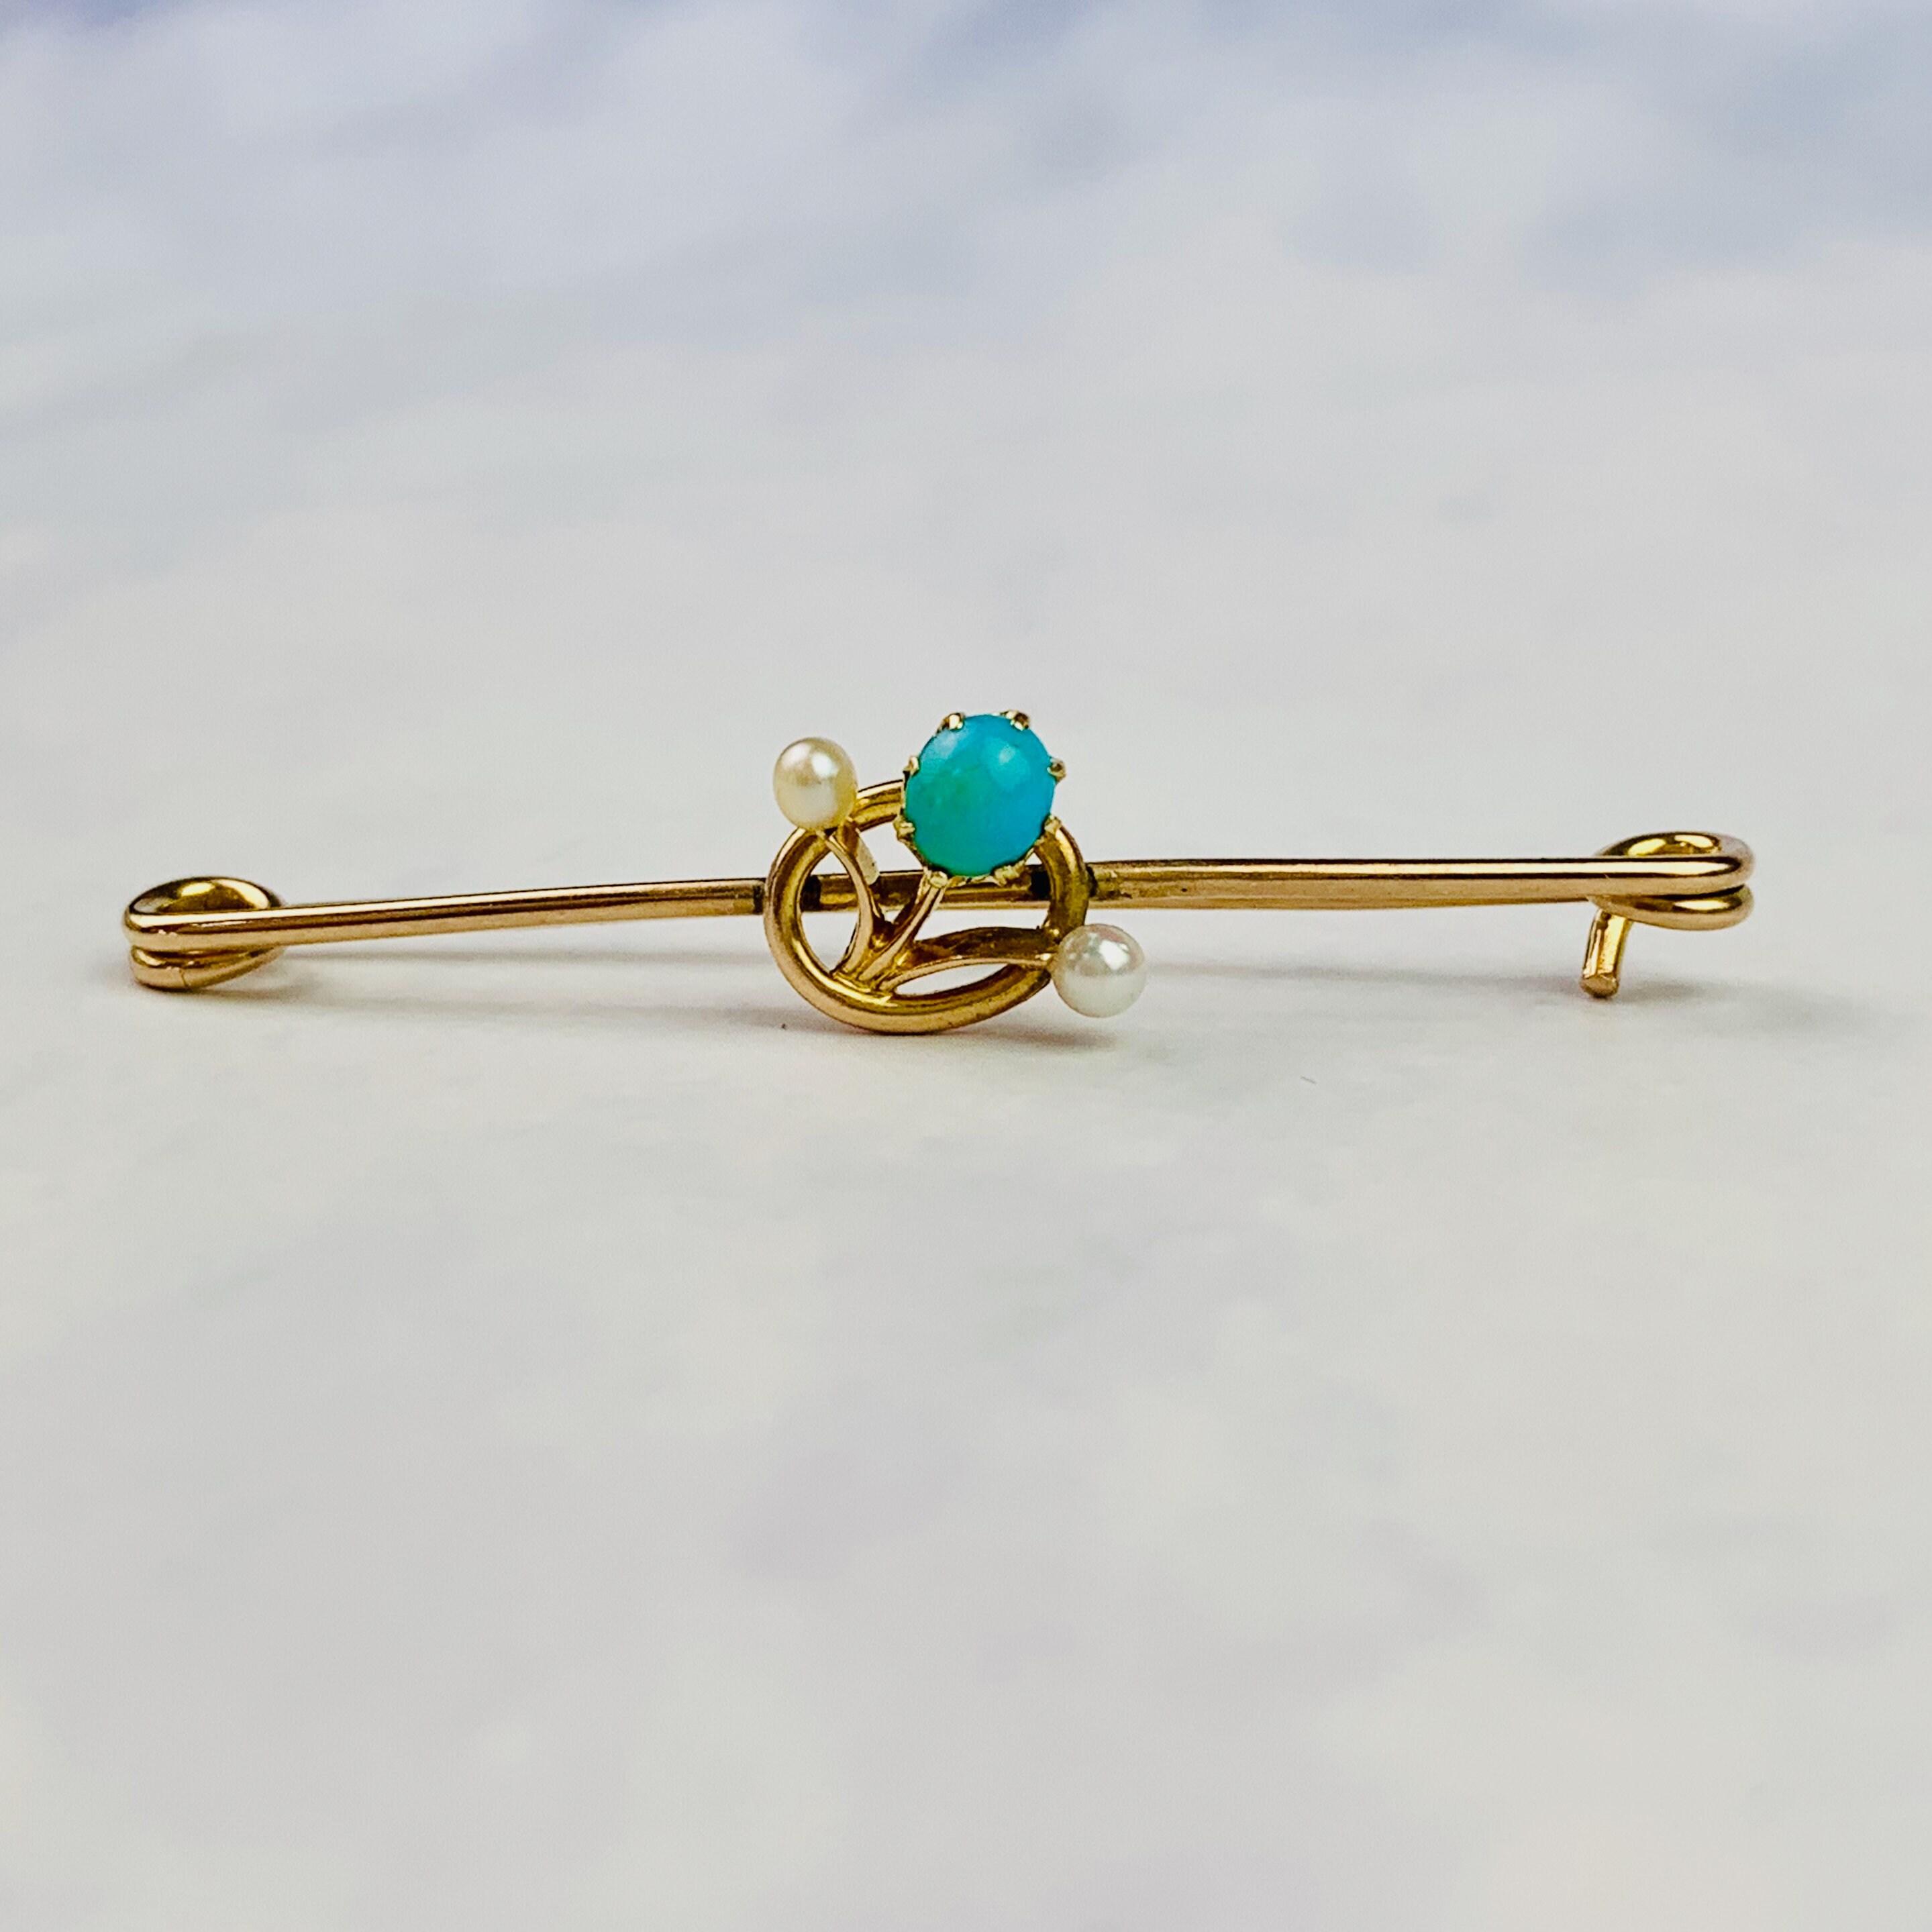 Antique 9K / 9ct Gold Lingerie Pin Safety Pin Brooch With - Etsy